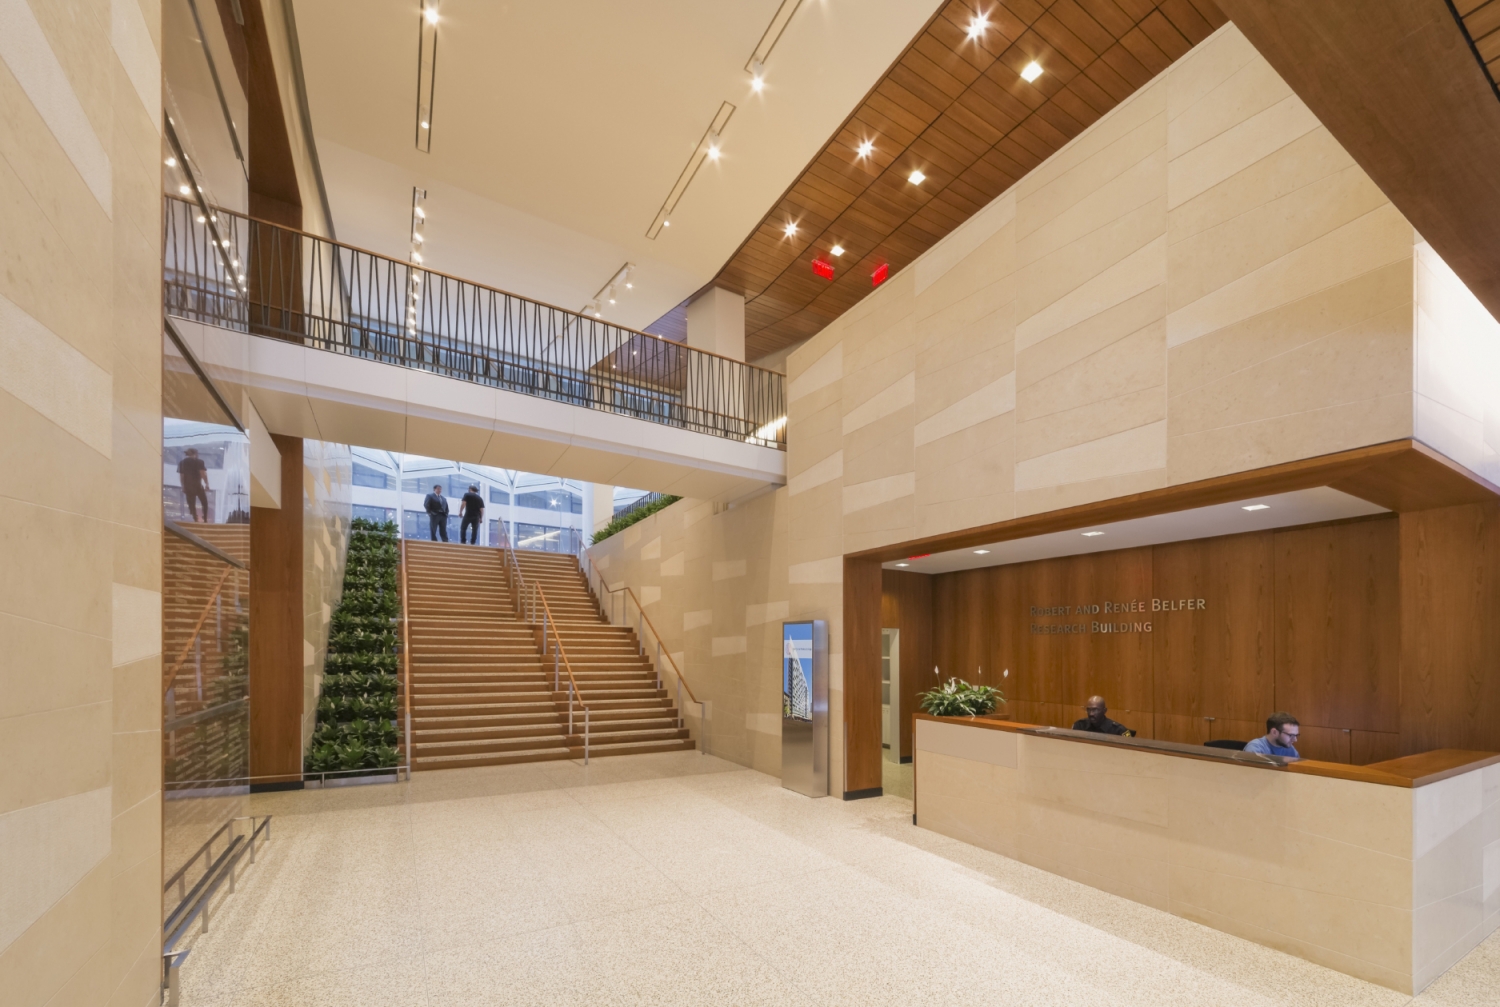 The Belfer Research Building's lobby